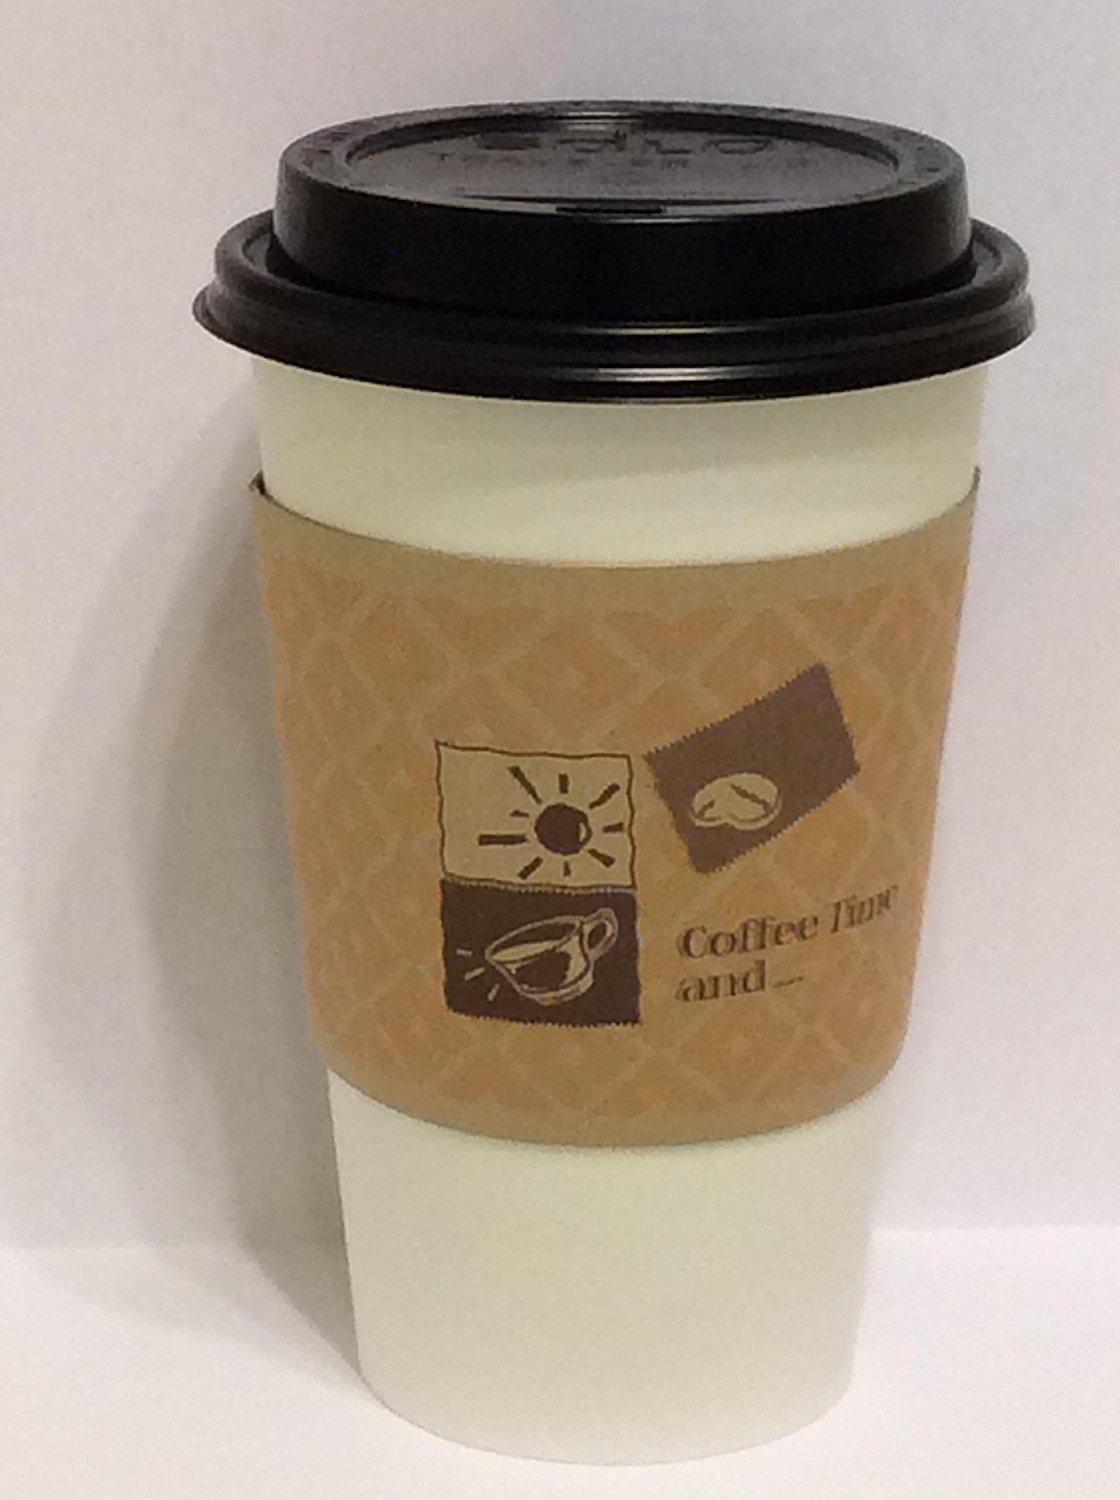 disposable coffee cups with lids and sleeves